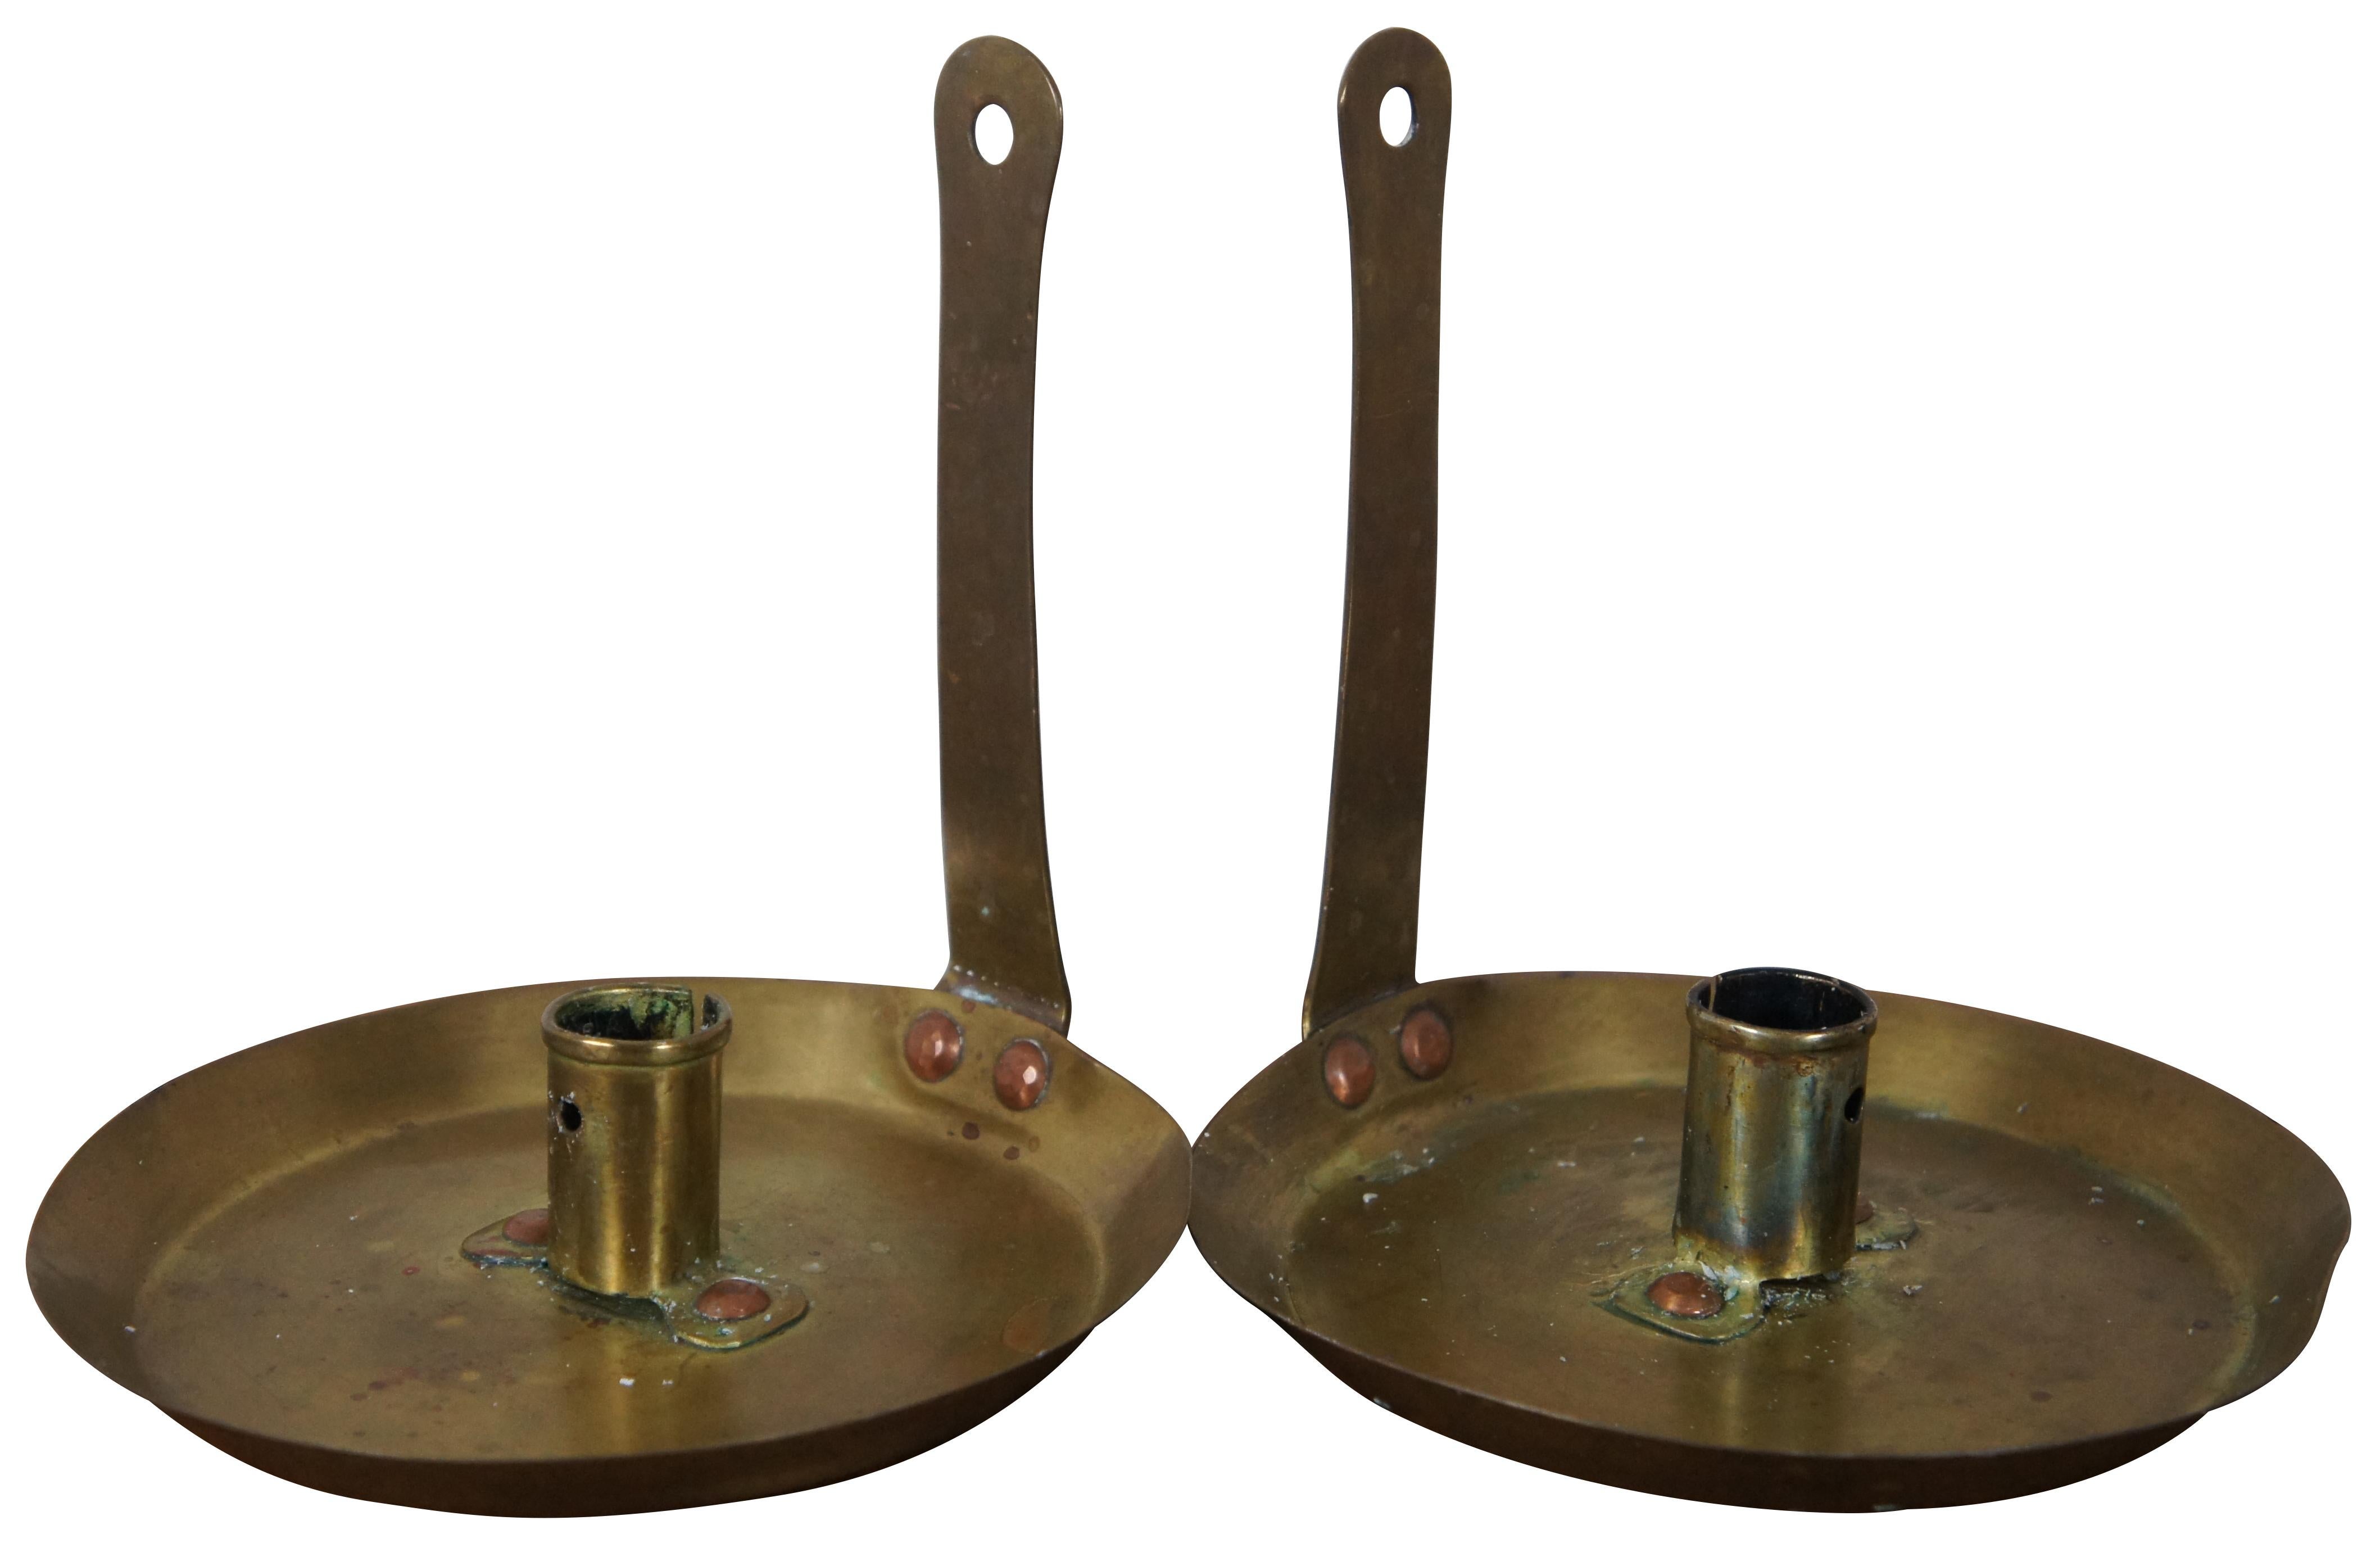 Pair of antique primitive brass chamber stick candle holders in the manner of a frying pan with tall straight handle that could be used to hang the holders as wall sconces.